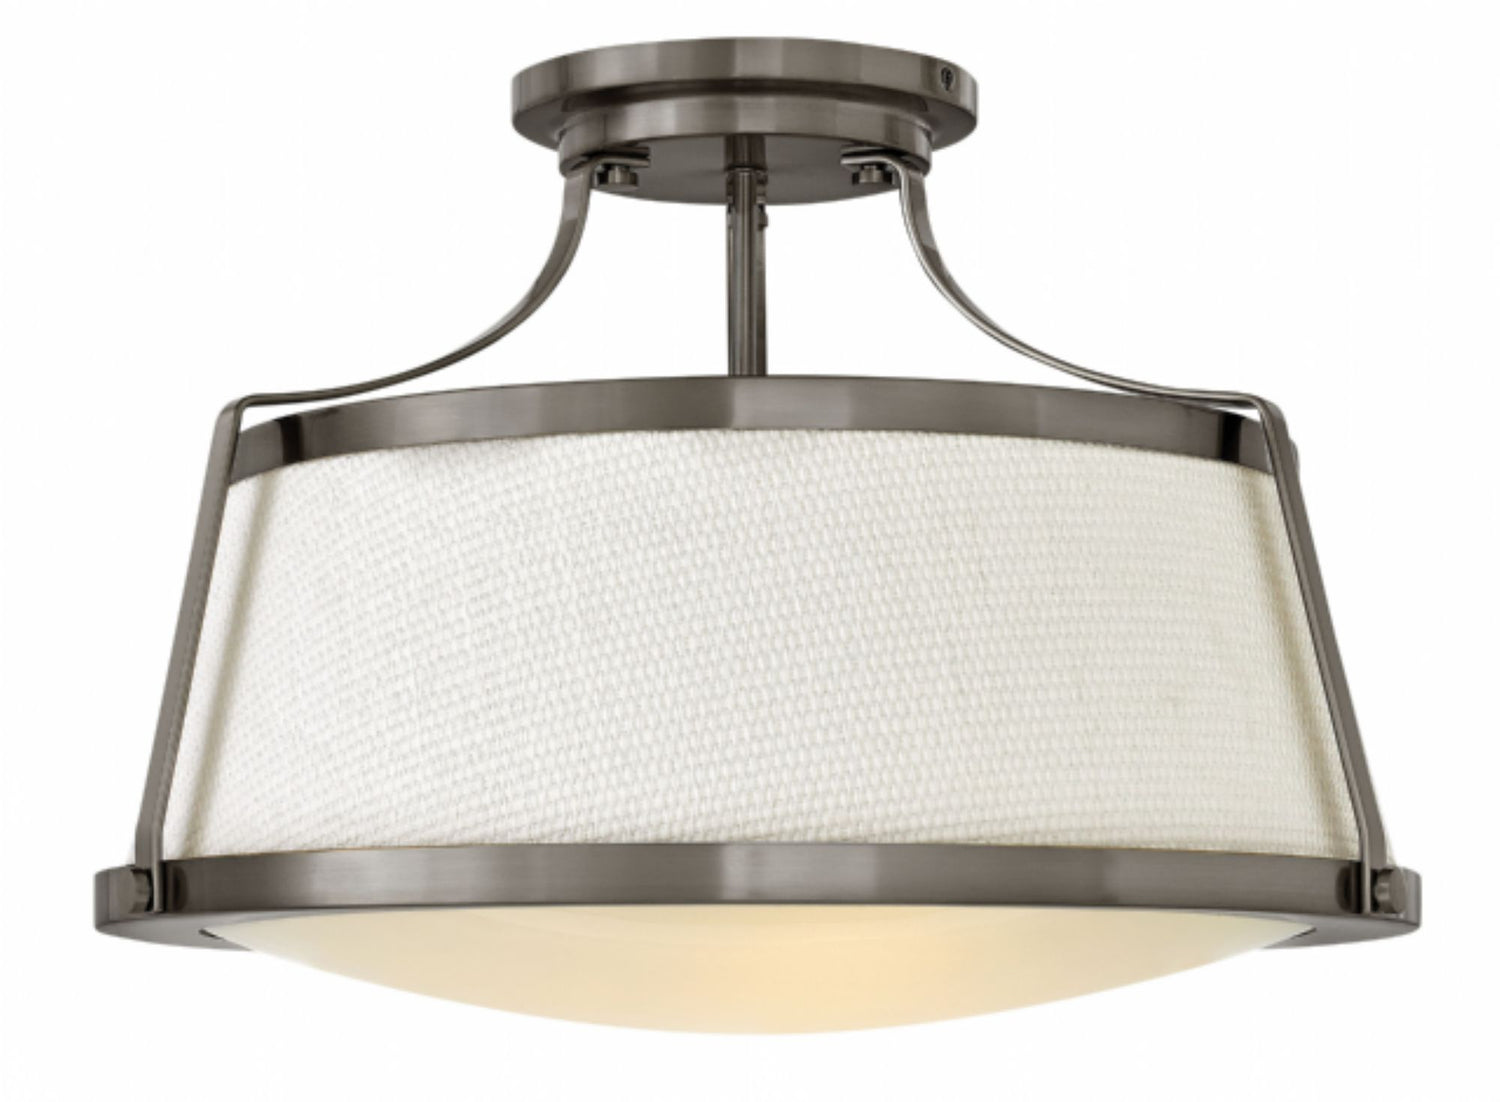 Charlotte 3 Light Semi Flush in Antique Nickel with Woven Off-White Fabric Shade by Hinkley Lighting 3522AN